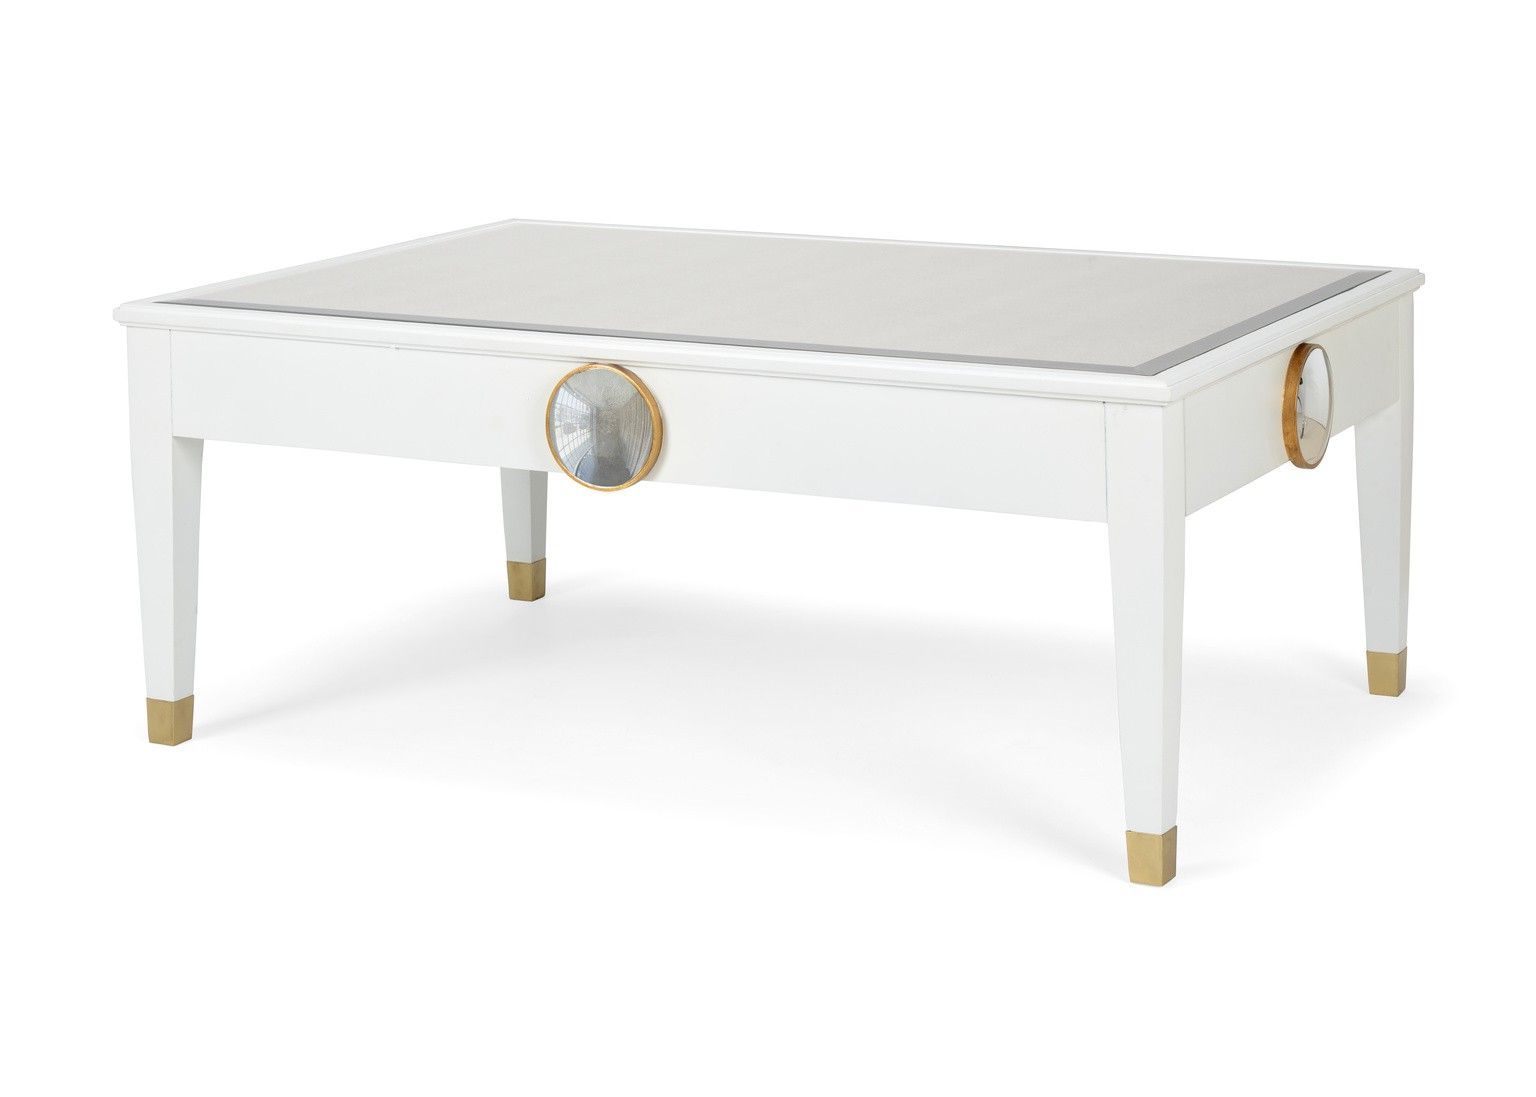 White Cocktail Table With Brass Edged Mirror Accent And For Well Liked Antique Mirror Cocktail Tables (View 10 of 20)